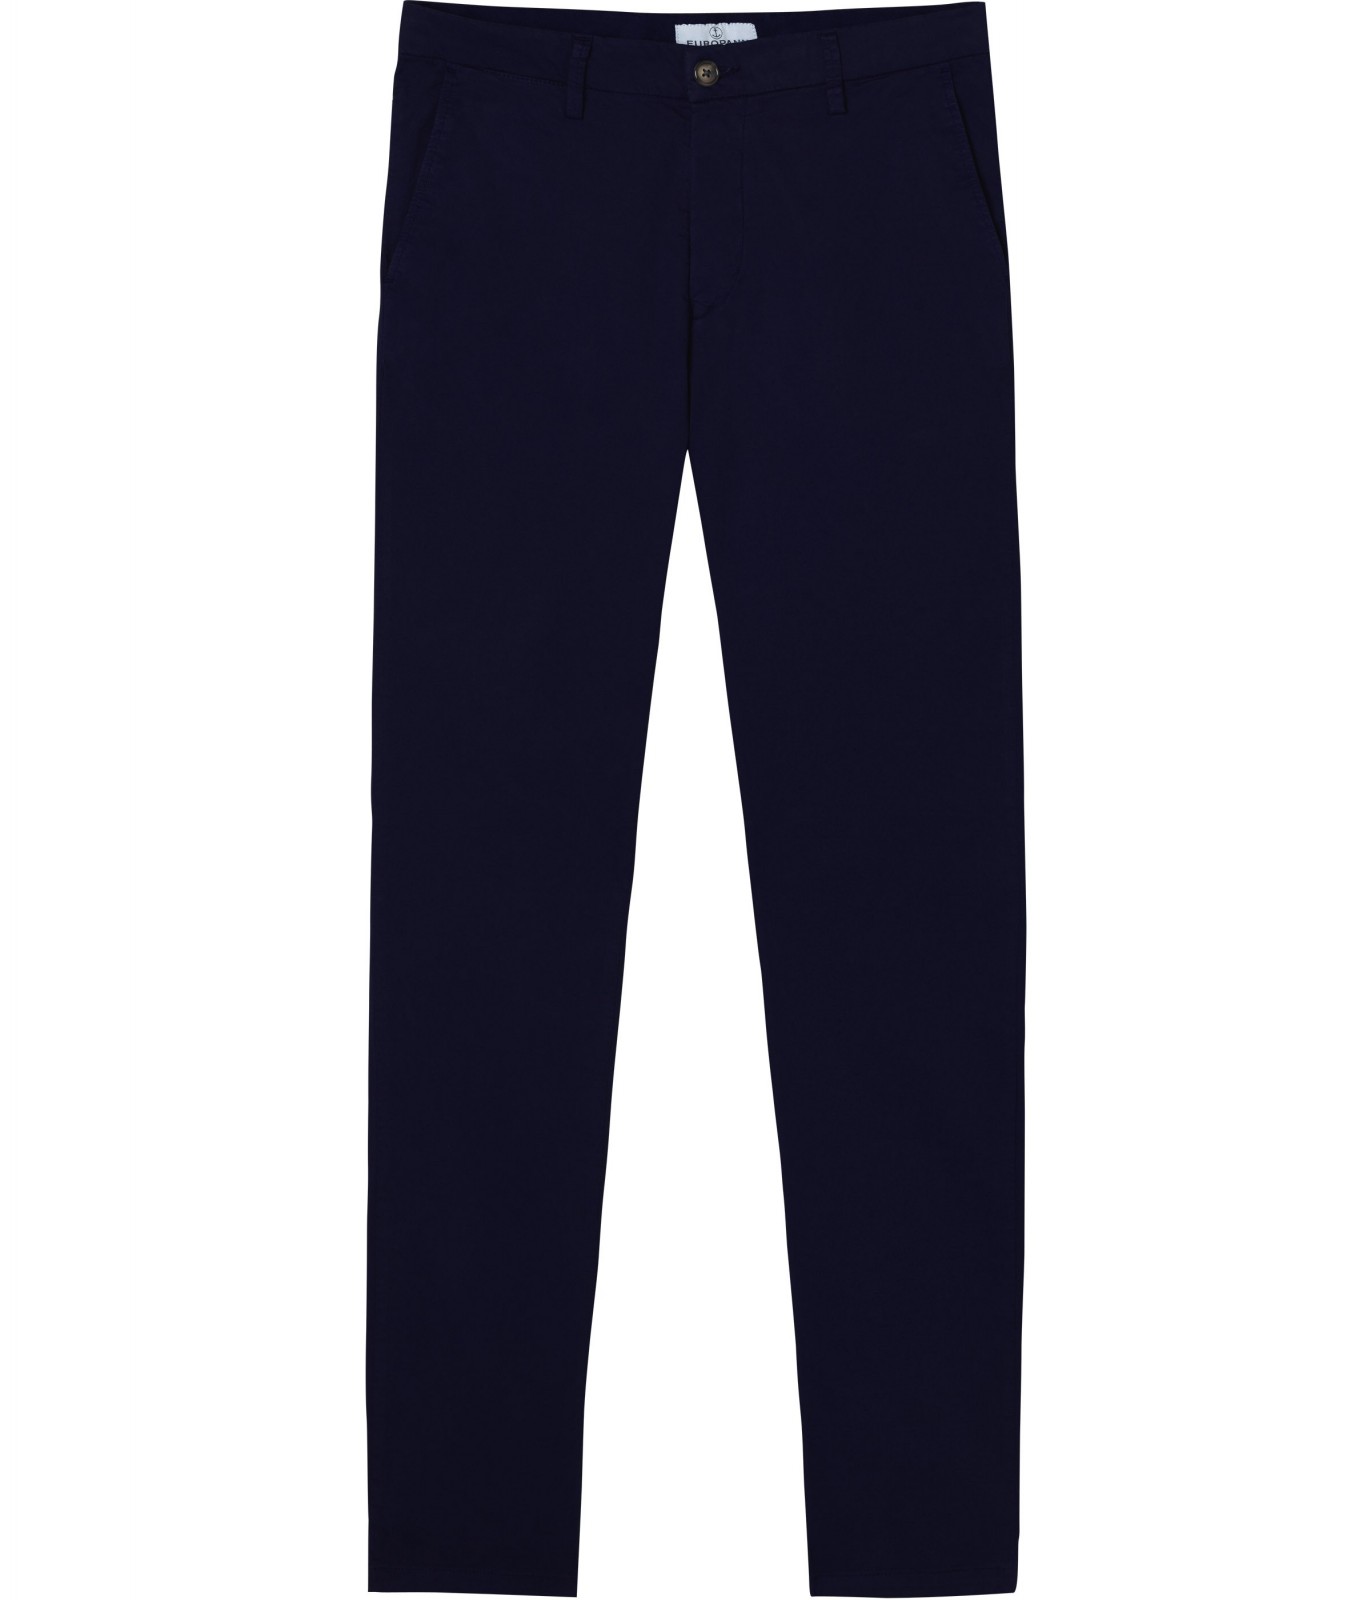 Blue for Men Slacks and Chinos Casual trousers and trousers Mens Clothing Trousers Nanamica Cotton Wide Chino Trousers in Navy 